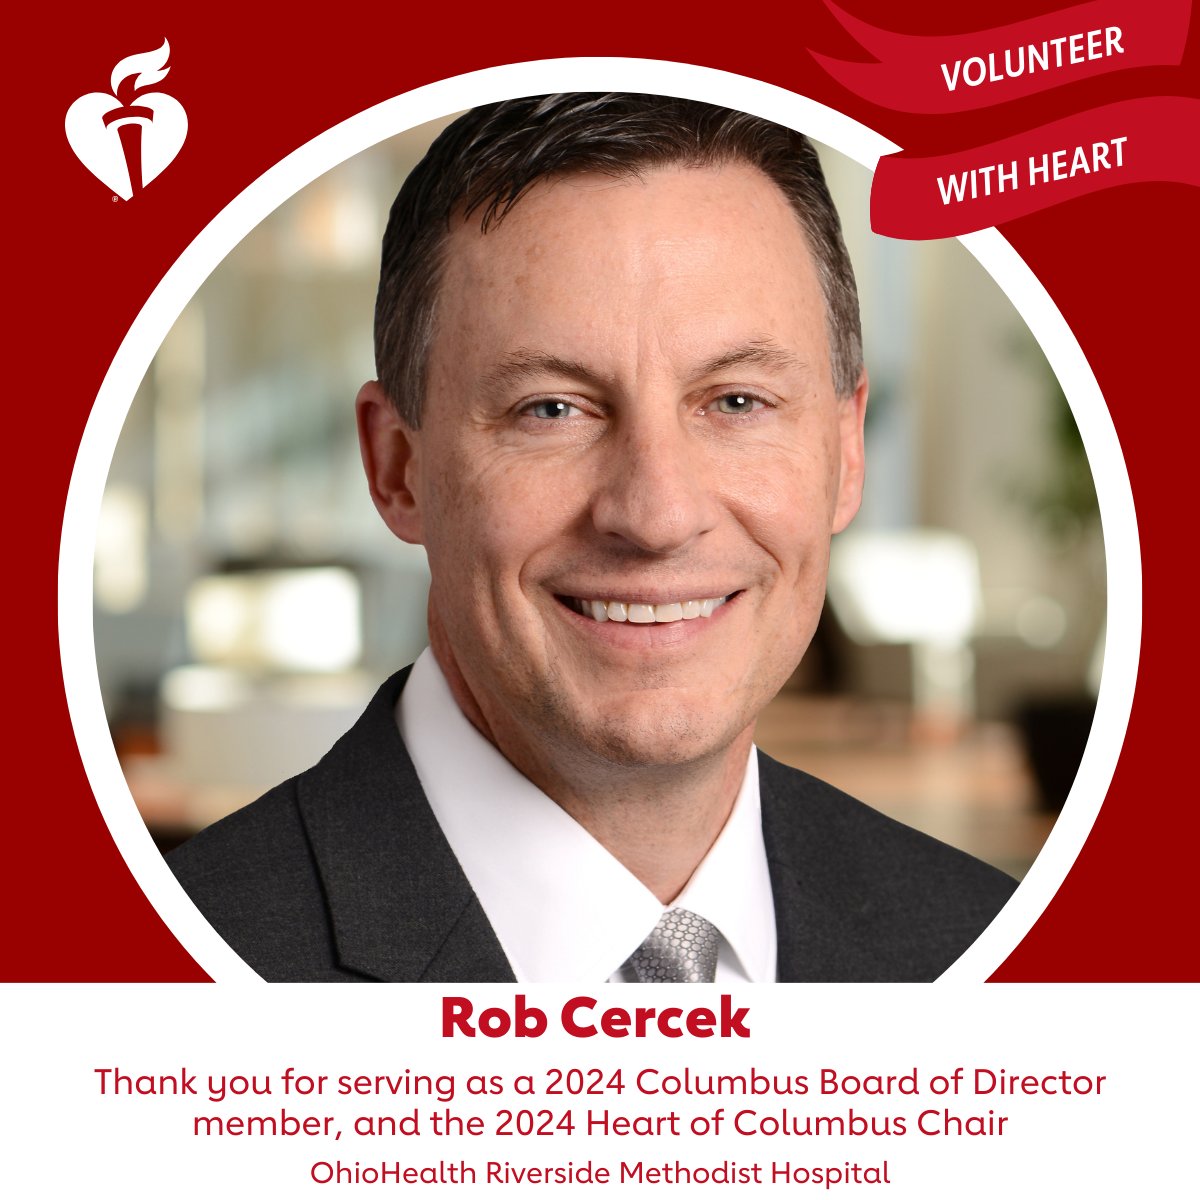 Continuing the volunteer week celebration, we want to extend a thank you to Rob Cercek at @OhioHealth. Rob is serving as the 2024 Heart of Columbus Chair this year, and we are so grateful for his volunteer leadership! #NVW #VolunteersWithHeart